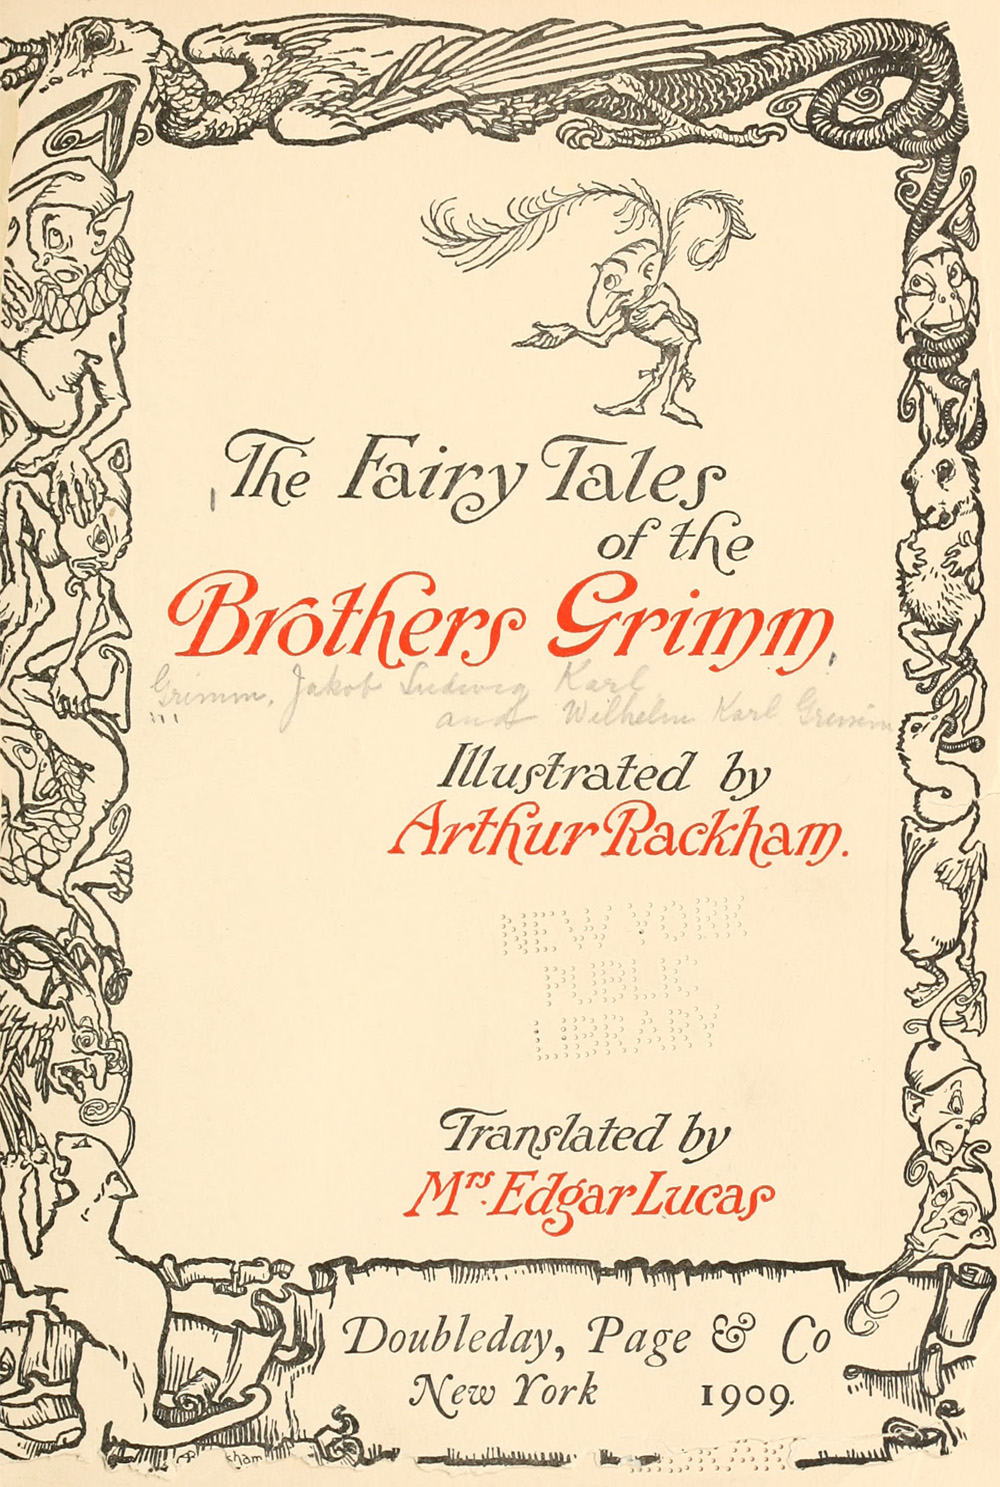 Fairy Tales Brothers Grimm